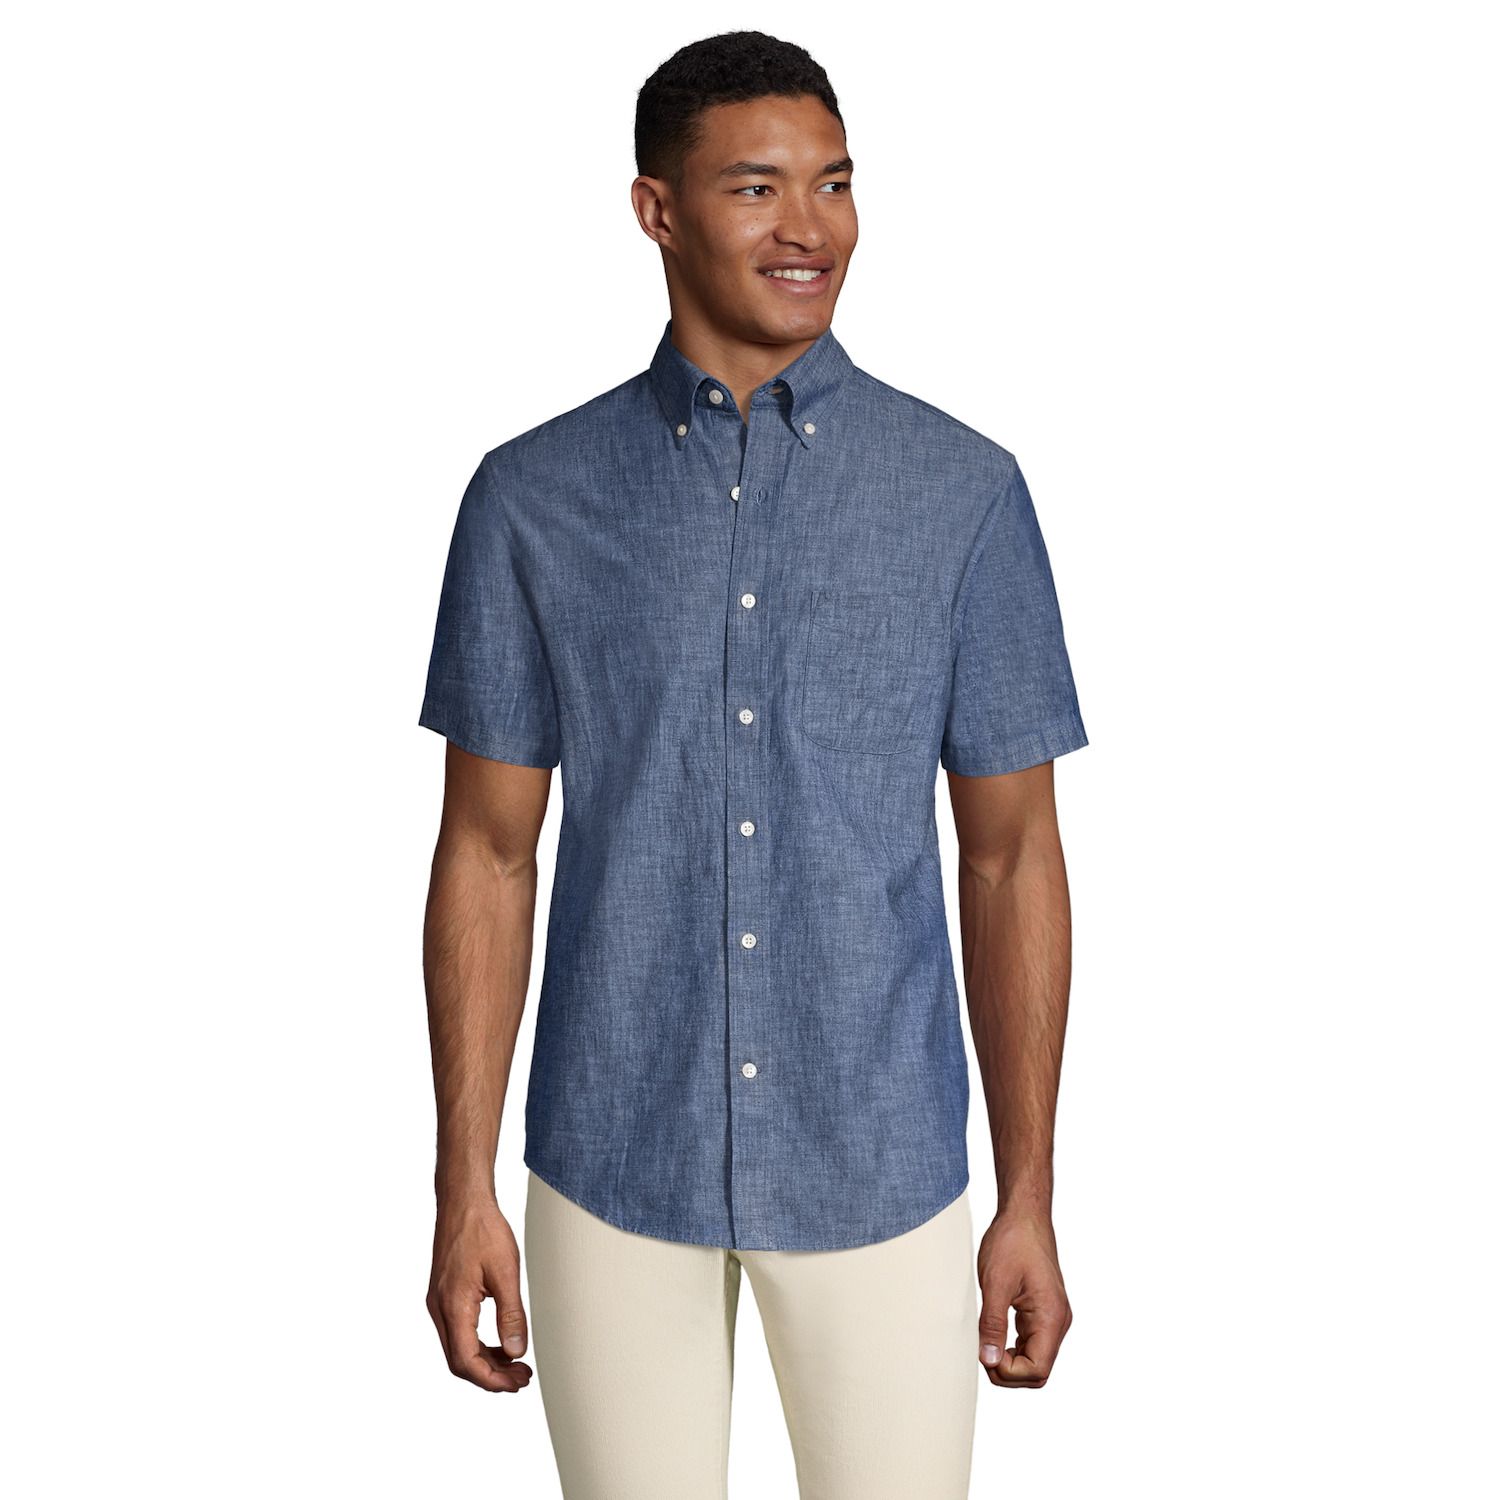 Image for Lands' End Men's Traditional-Fit Chambray Button-Down Shirt at Kohl's.